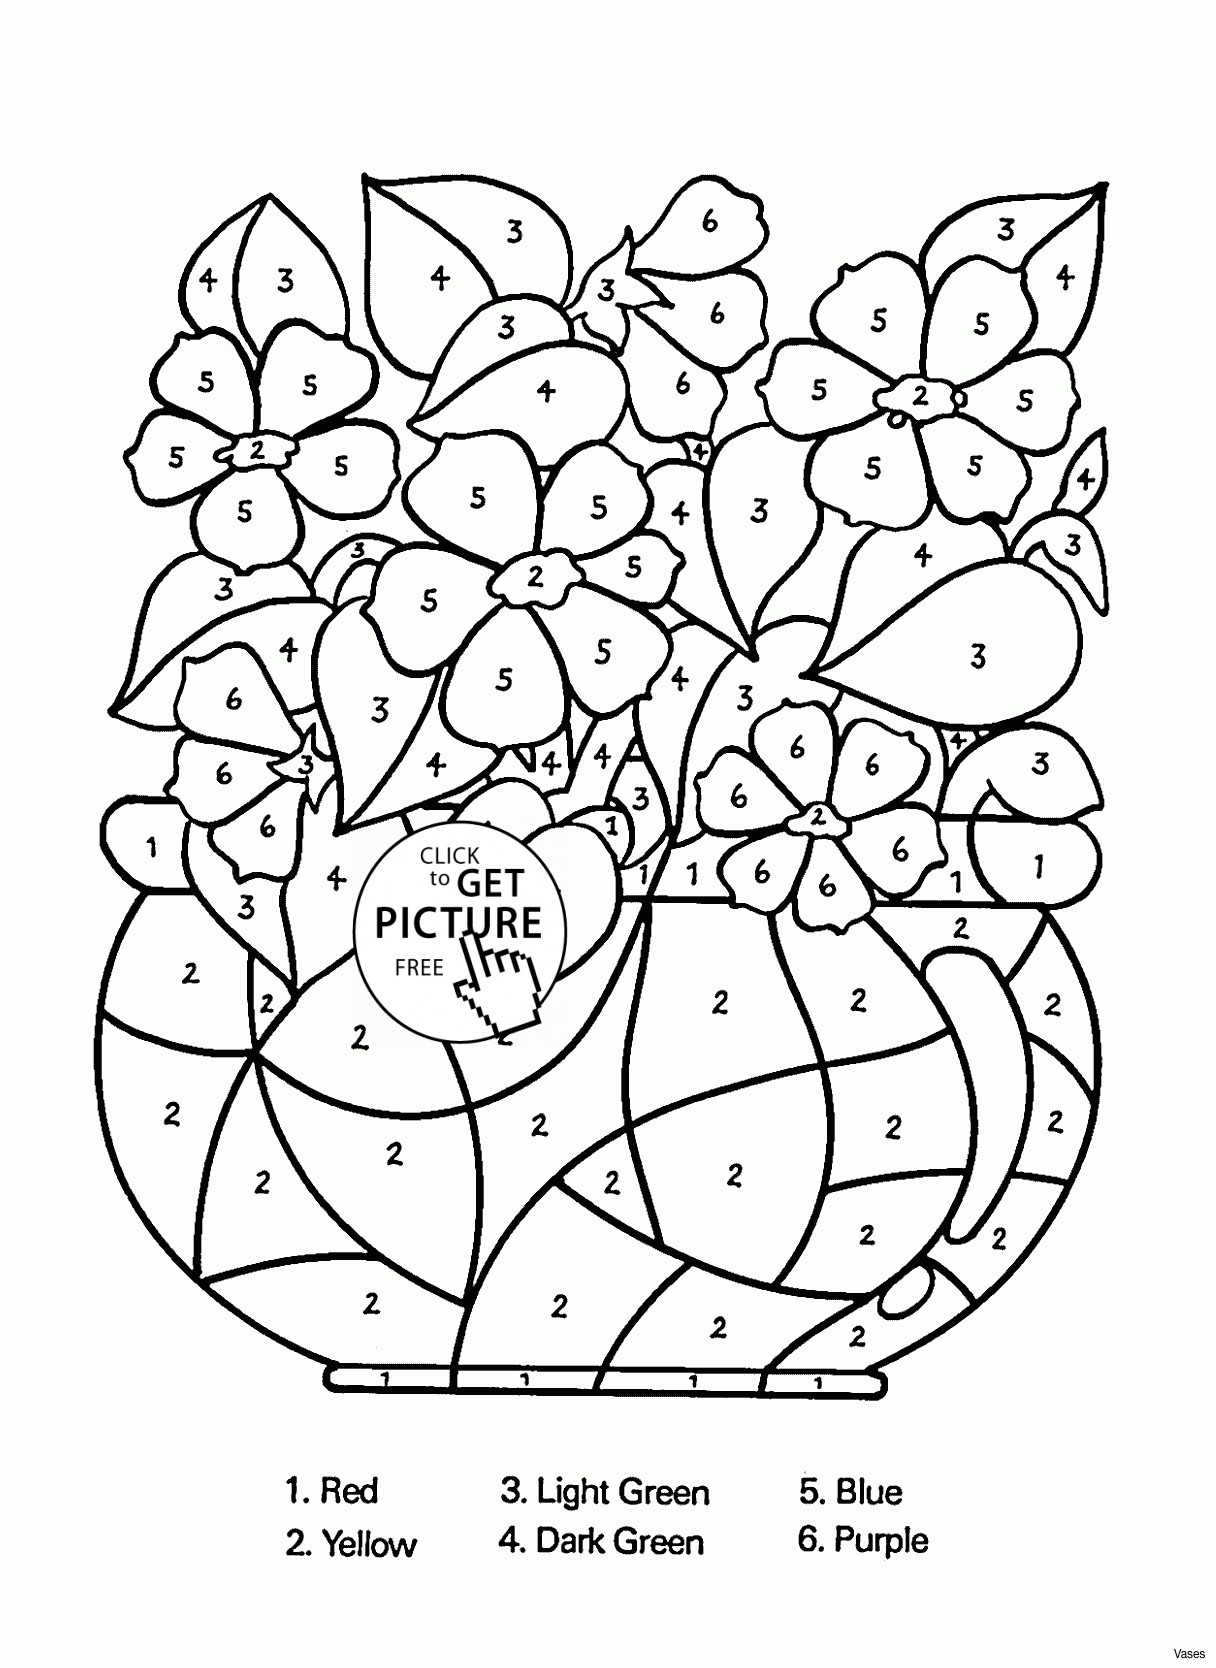 18 Perfect Vase with Red Roses 2024 free download vase with red roses of coloring pages of roses in a vase printable with cool vases flower vase coloring page pages flowers in a top i 0d of coloring pages of roses in a vase